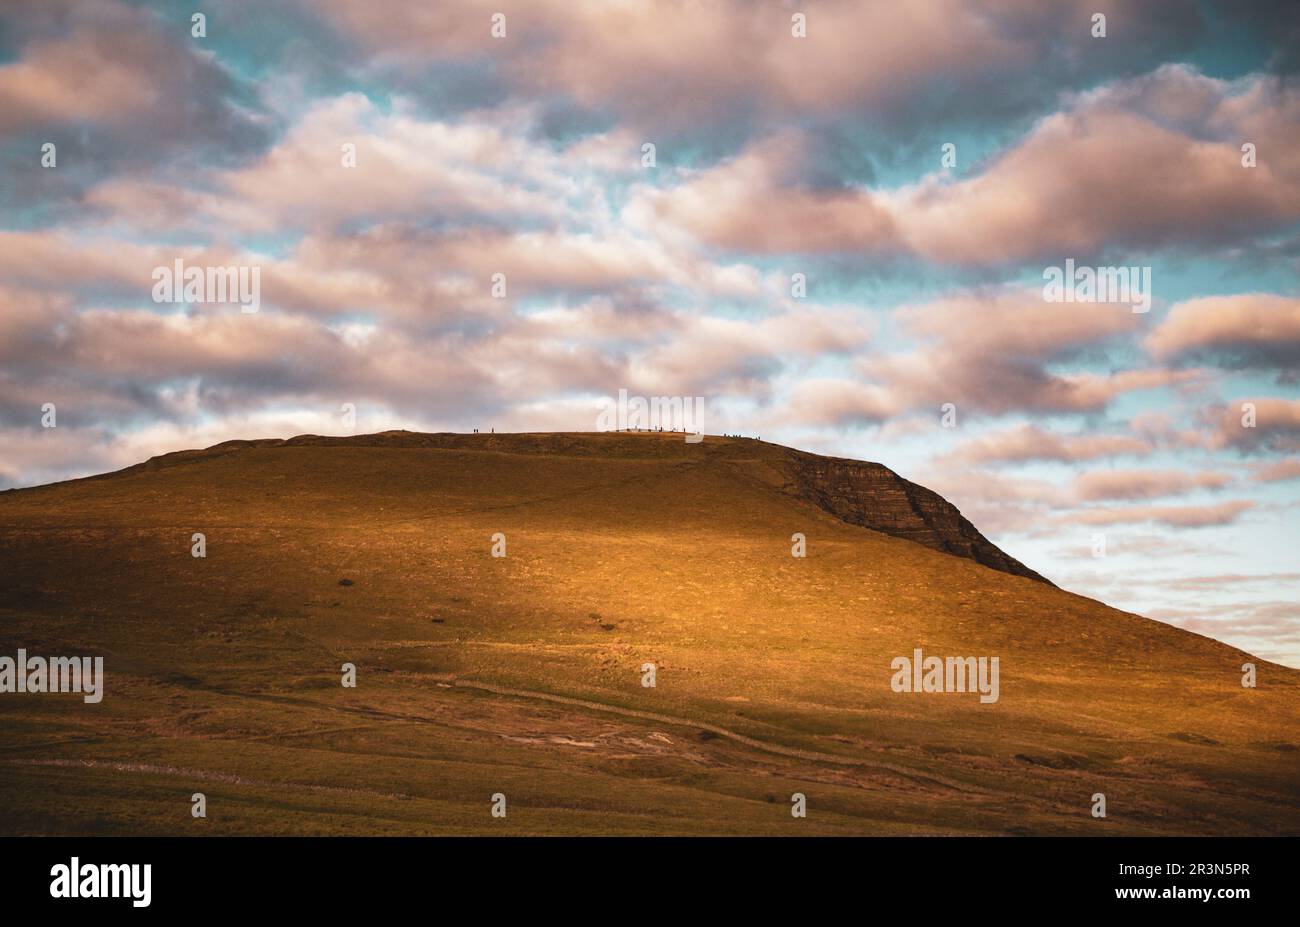 Wide shot of Mam Tor, a landmark hill in the English Peak District washed in a golden sunset with a dramatic cloudy sky and hikers far into the distan Stock Photo